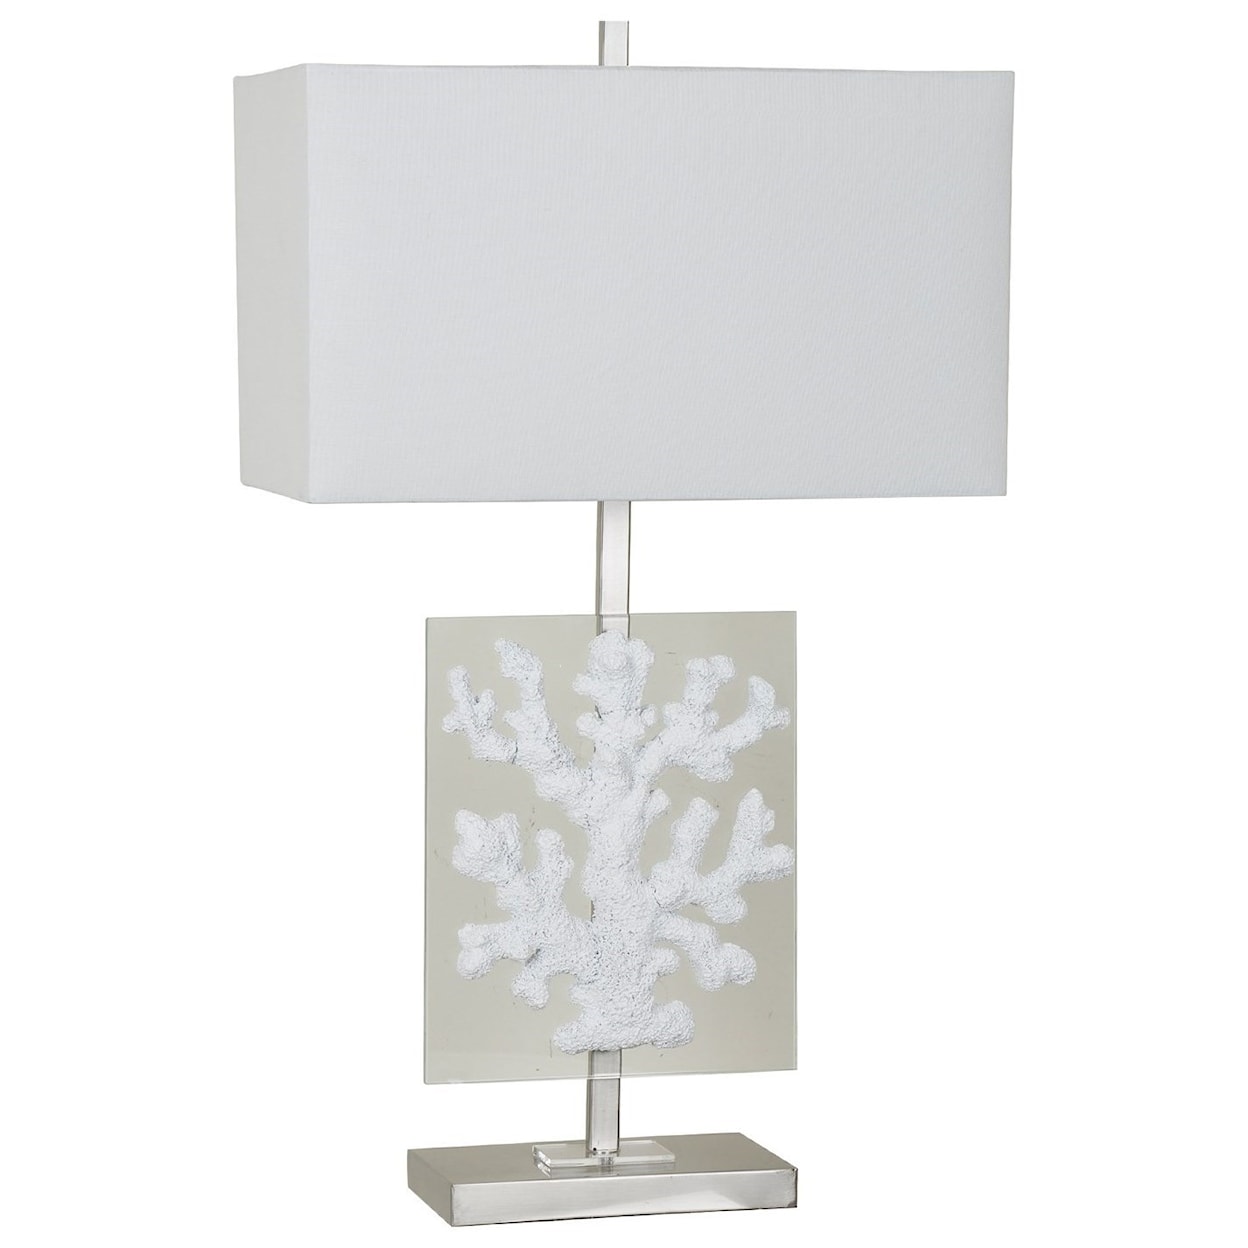 Crestview Collection Lighting Coral Glass Table Lamp